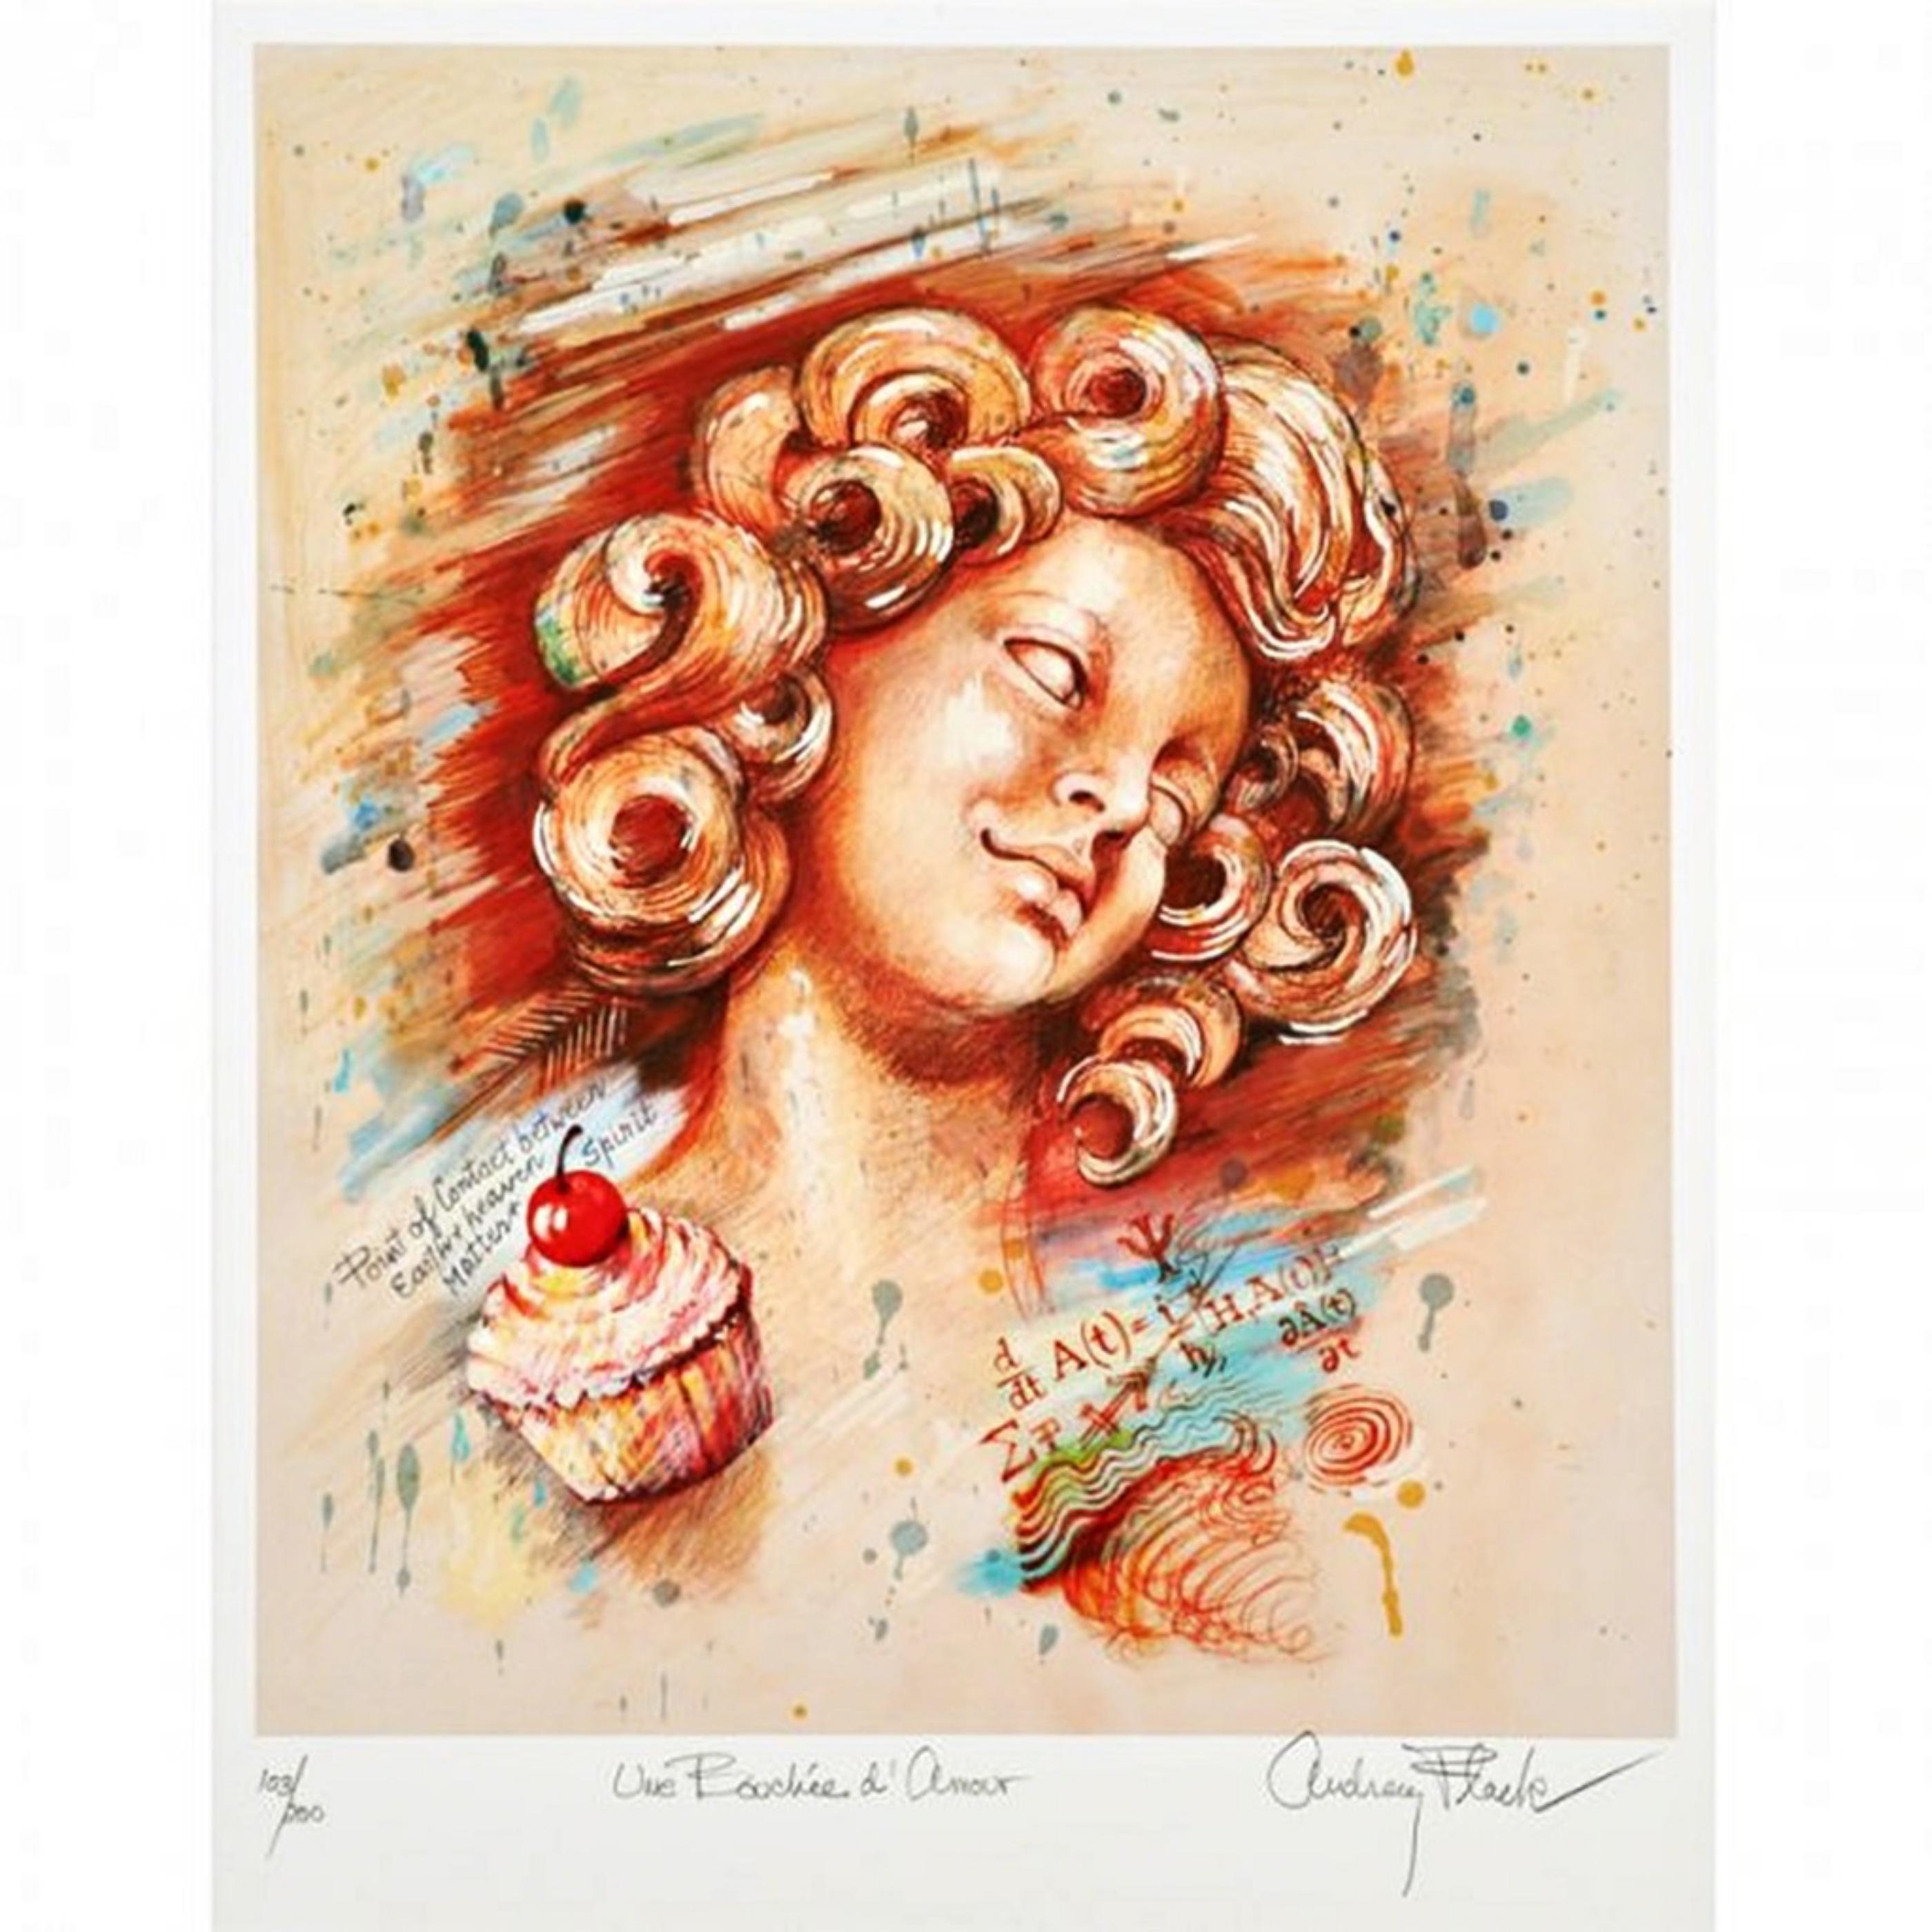 Une Bouchee D'Amour (signed presentation print by female photorealist artist)  - Print by Audrey Flack